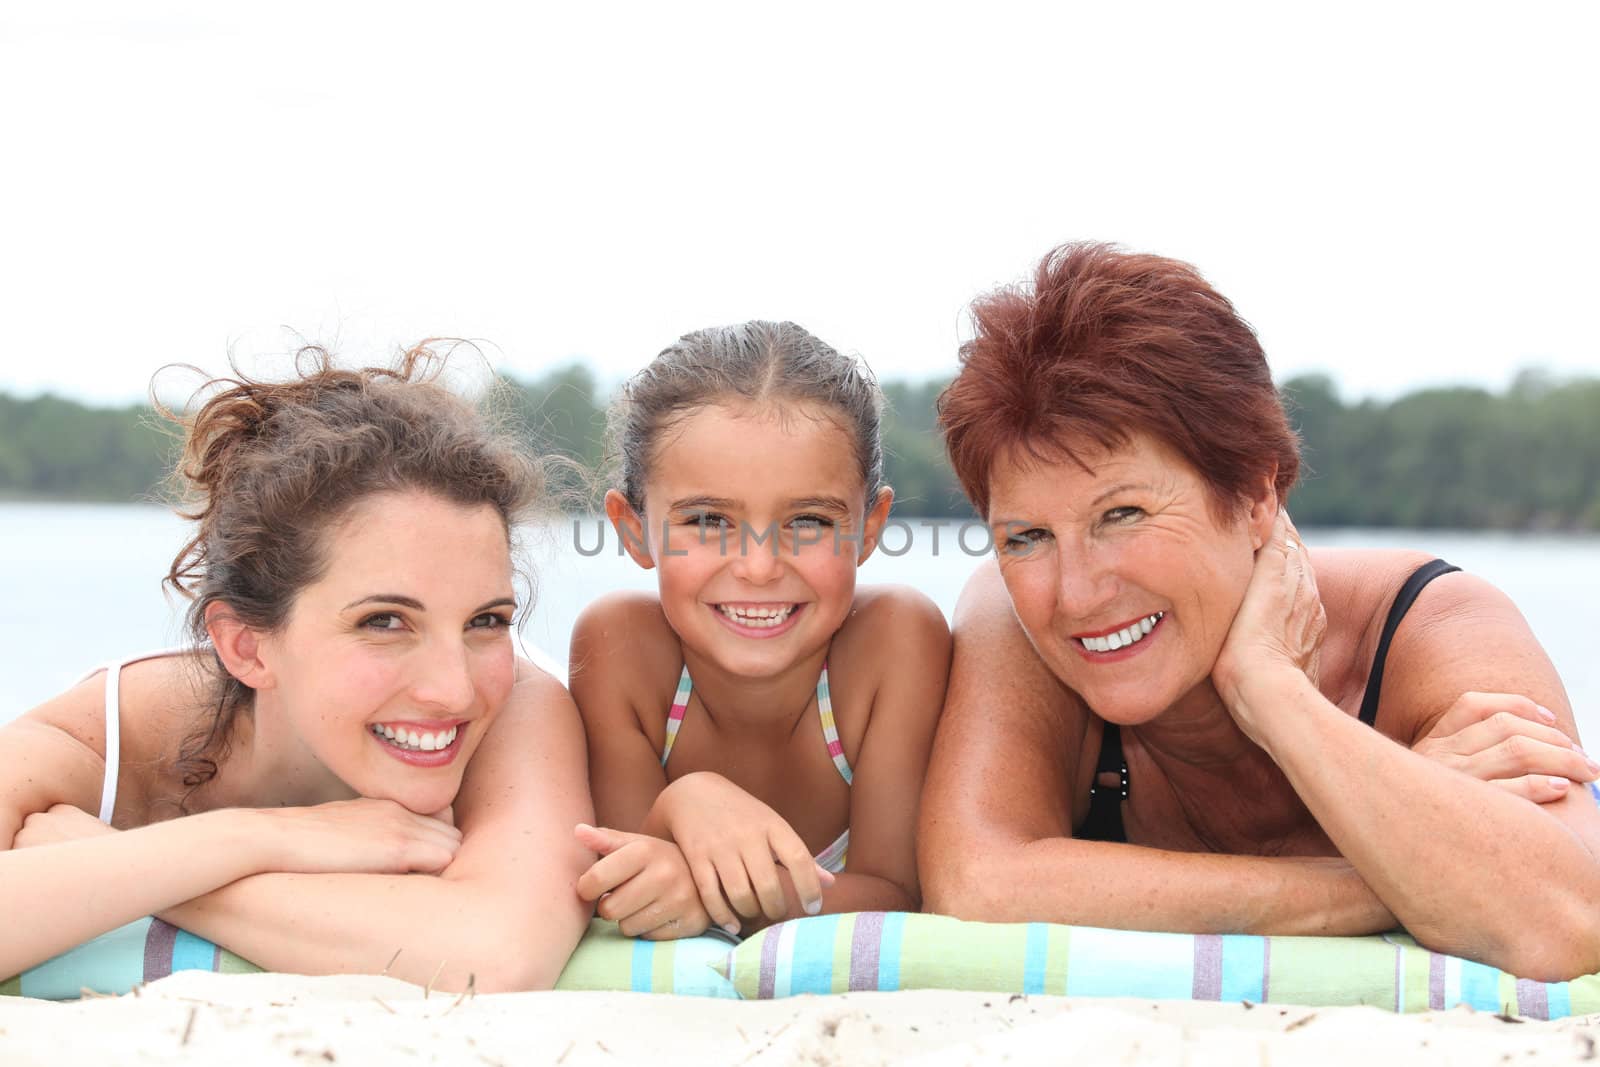 a 30 years old woman, a little girl and a 55 years old woman lying down on the beach, behind sea and forest background by phovoir